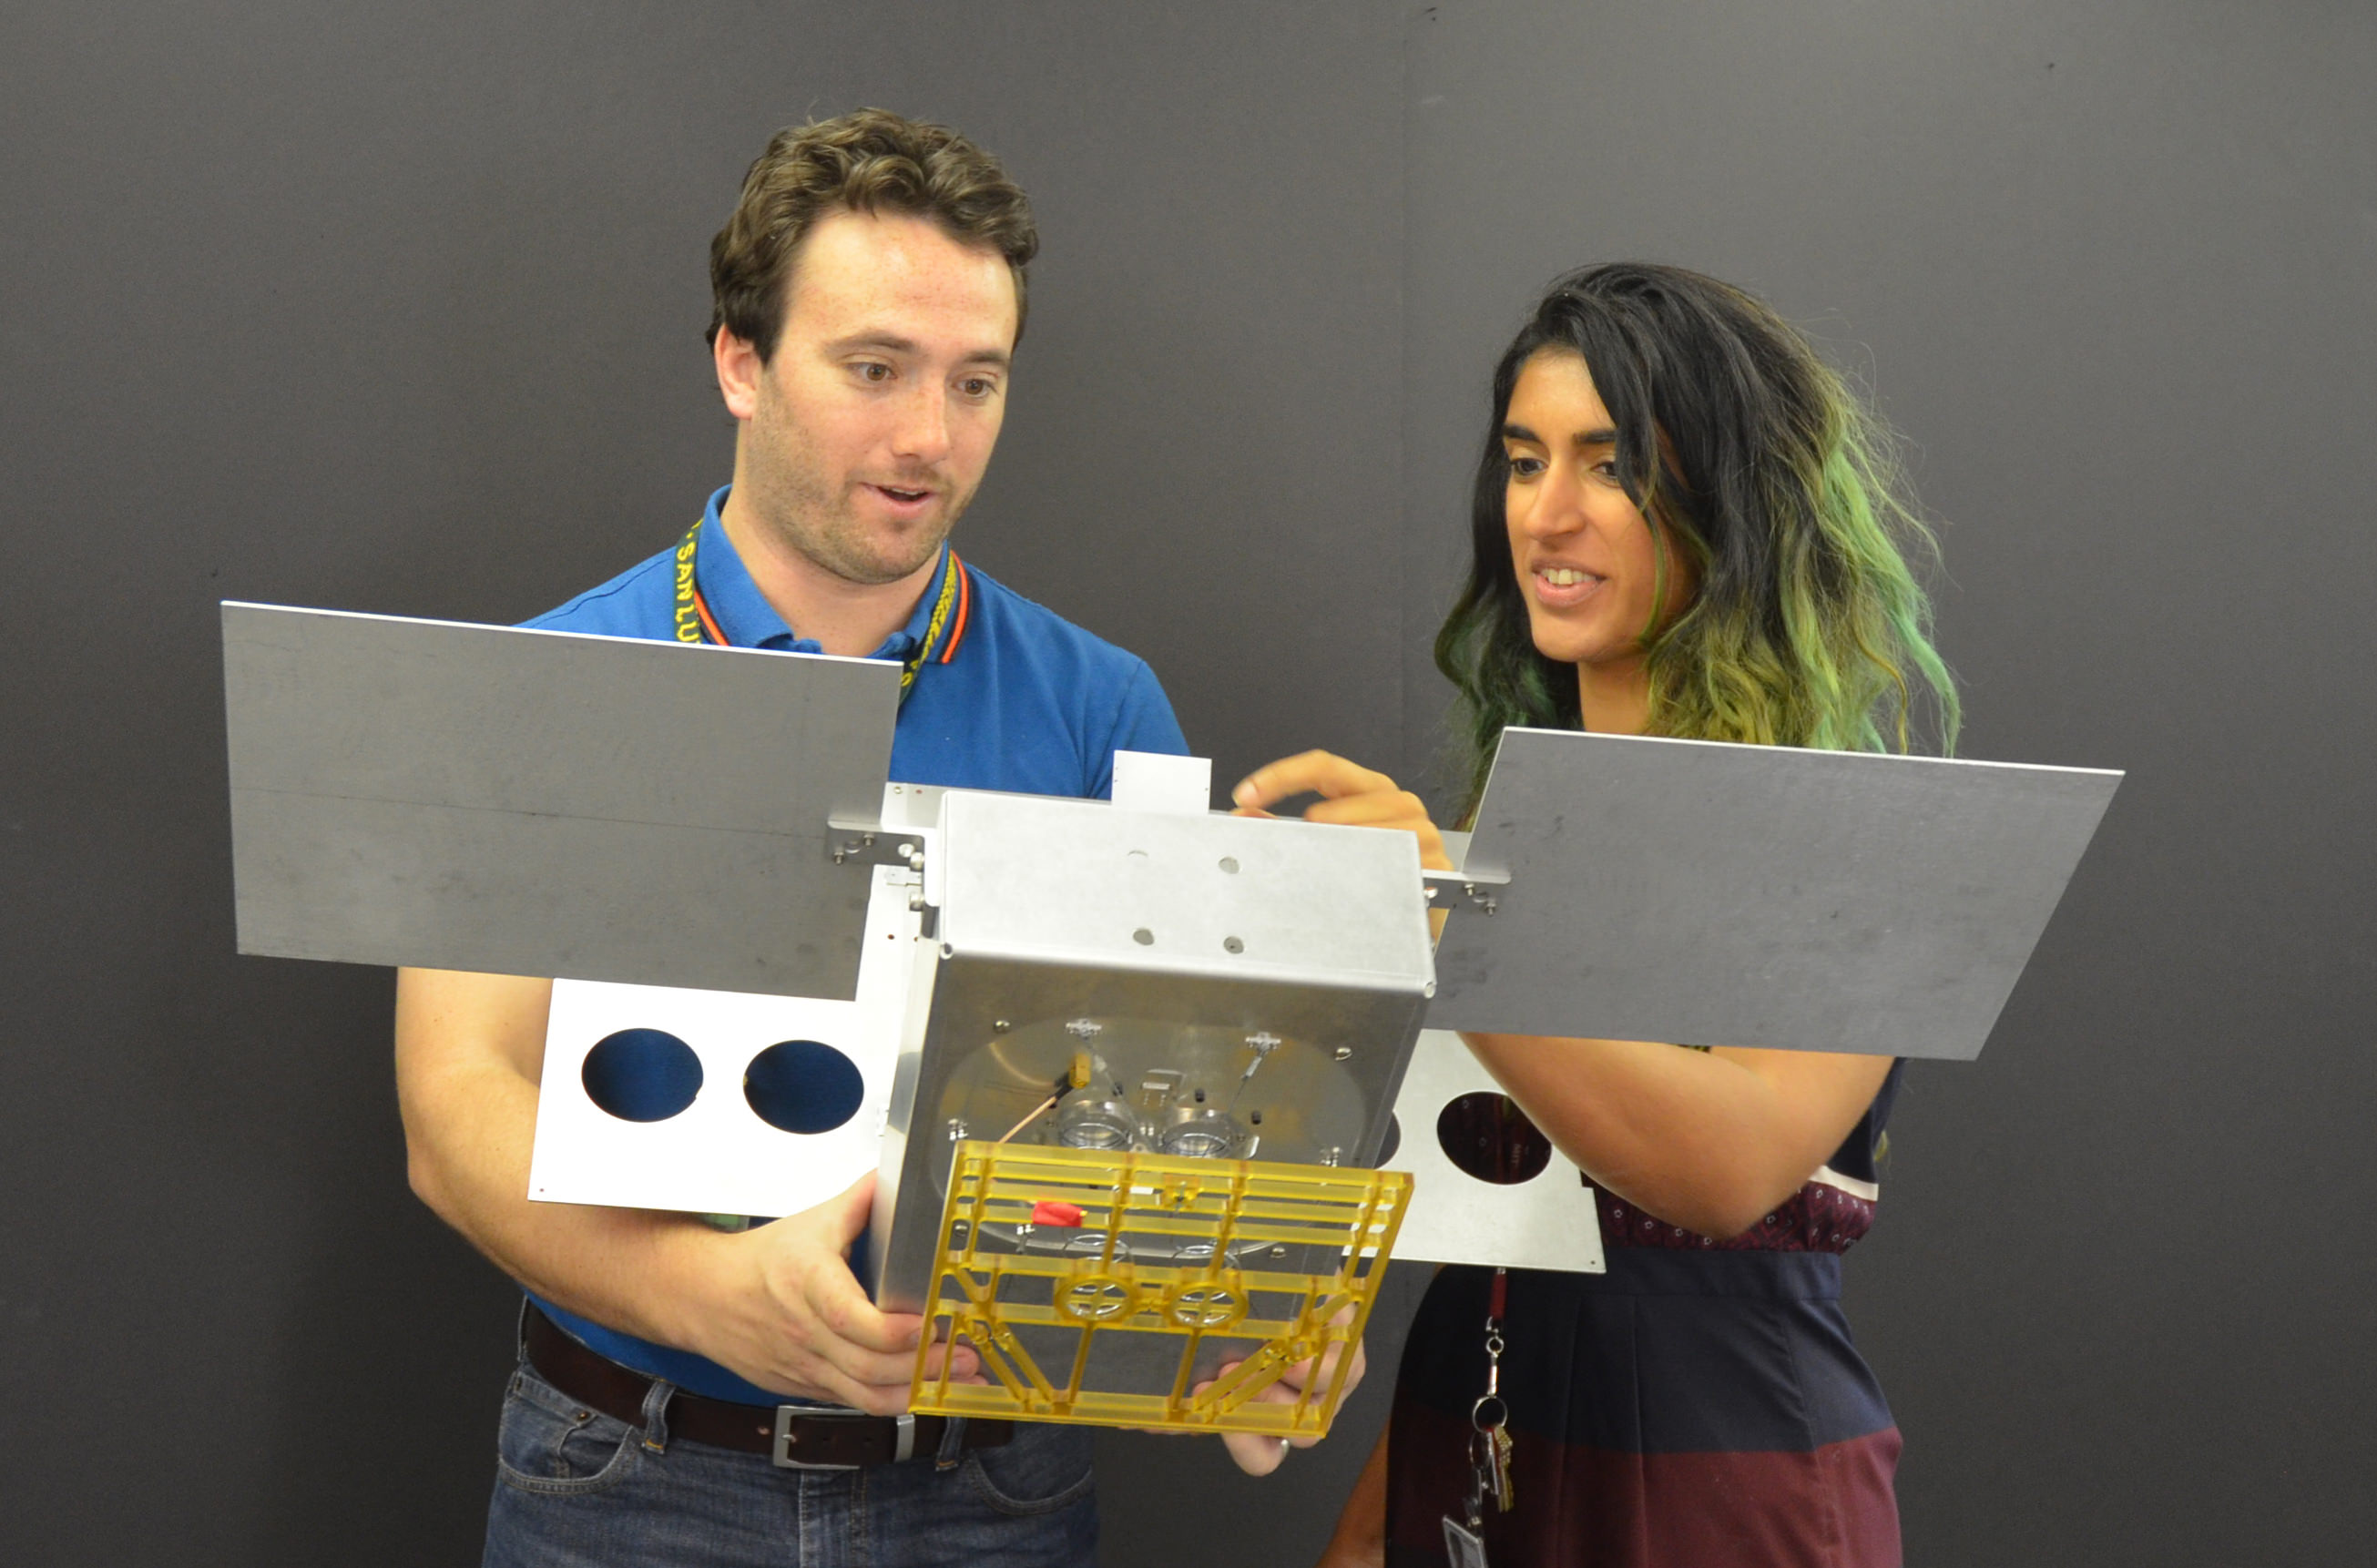 Engineers for NASA's MarCO technology demonstration display a full-scale mechanical mock-up of the small craft in development as part of NASA's next mission to Mars. Mechanical engineer Joel Steinkraus and systems engineer Farah Alibay are on the team at NASA's Jet Propulsion Laboratory, Pasadena, California, preparing twin MarCO (Mars Cube One) CubeSats for a March 2016 launch.  Credit: NASA/JPL-Caltech